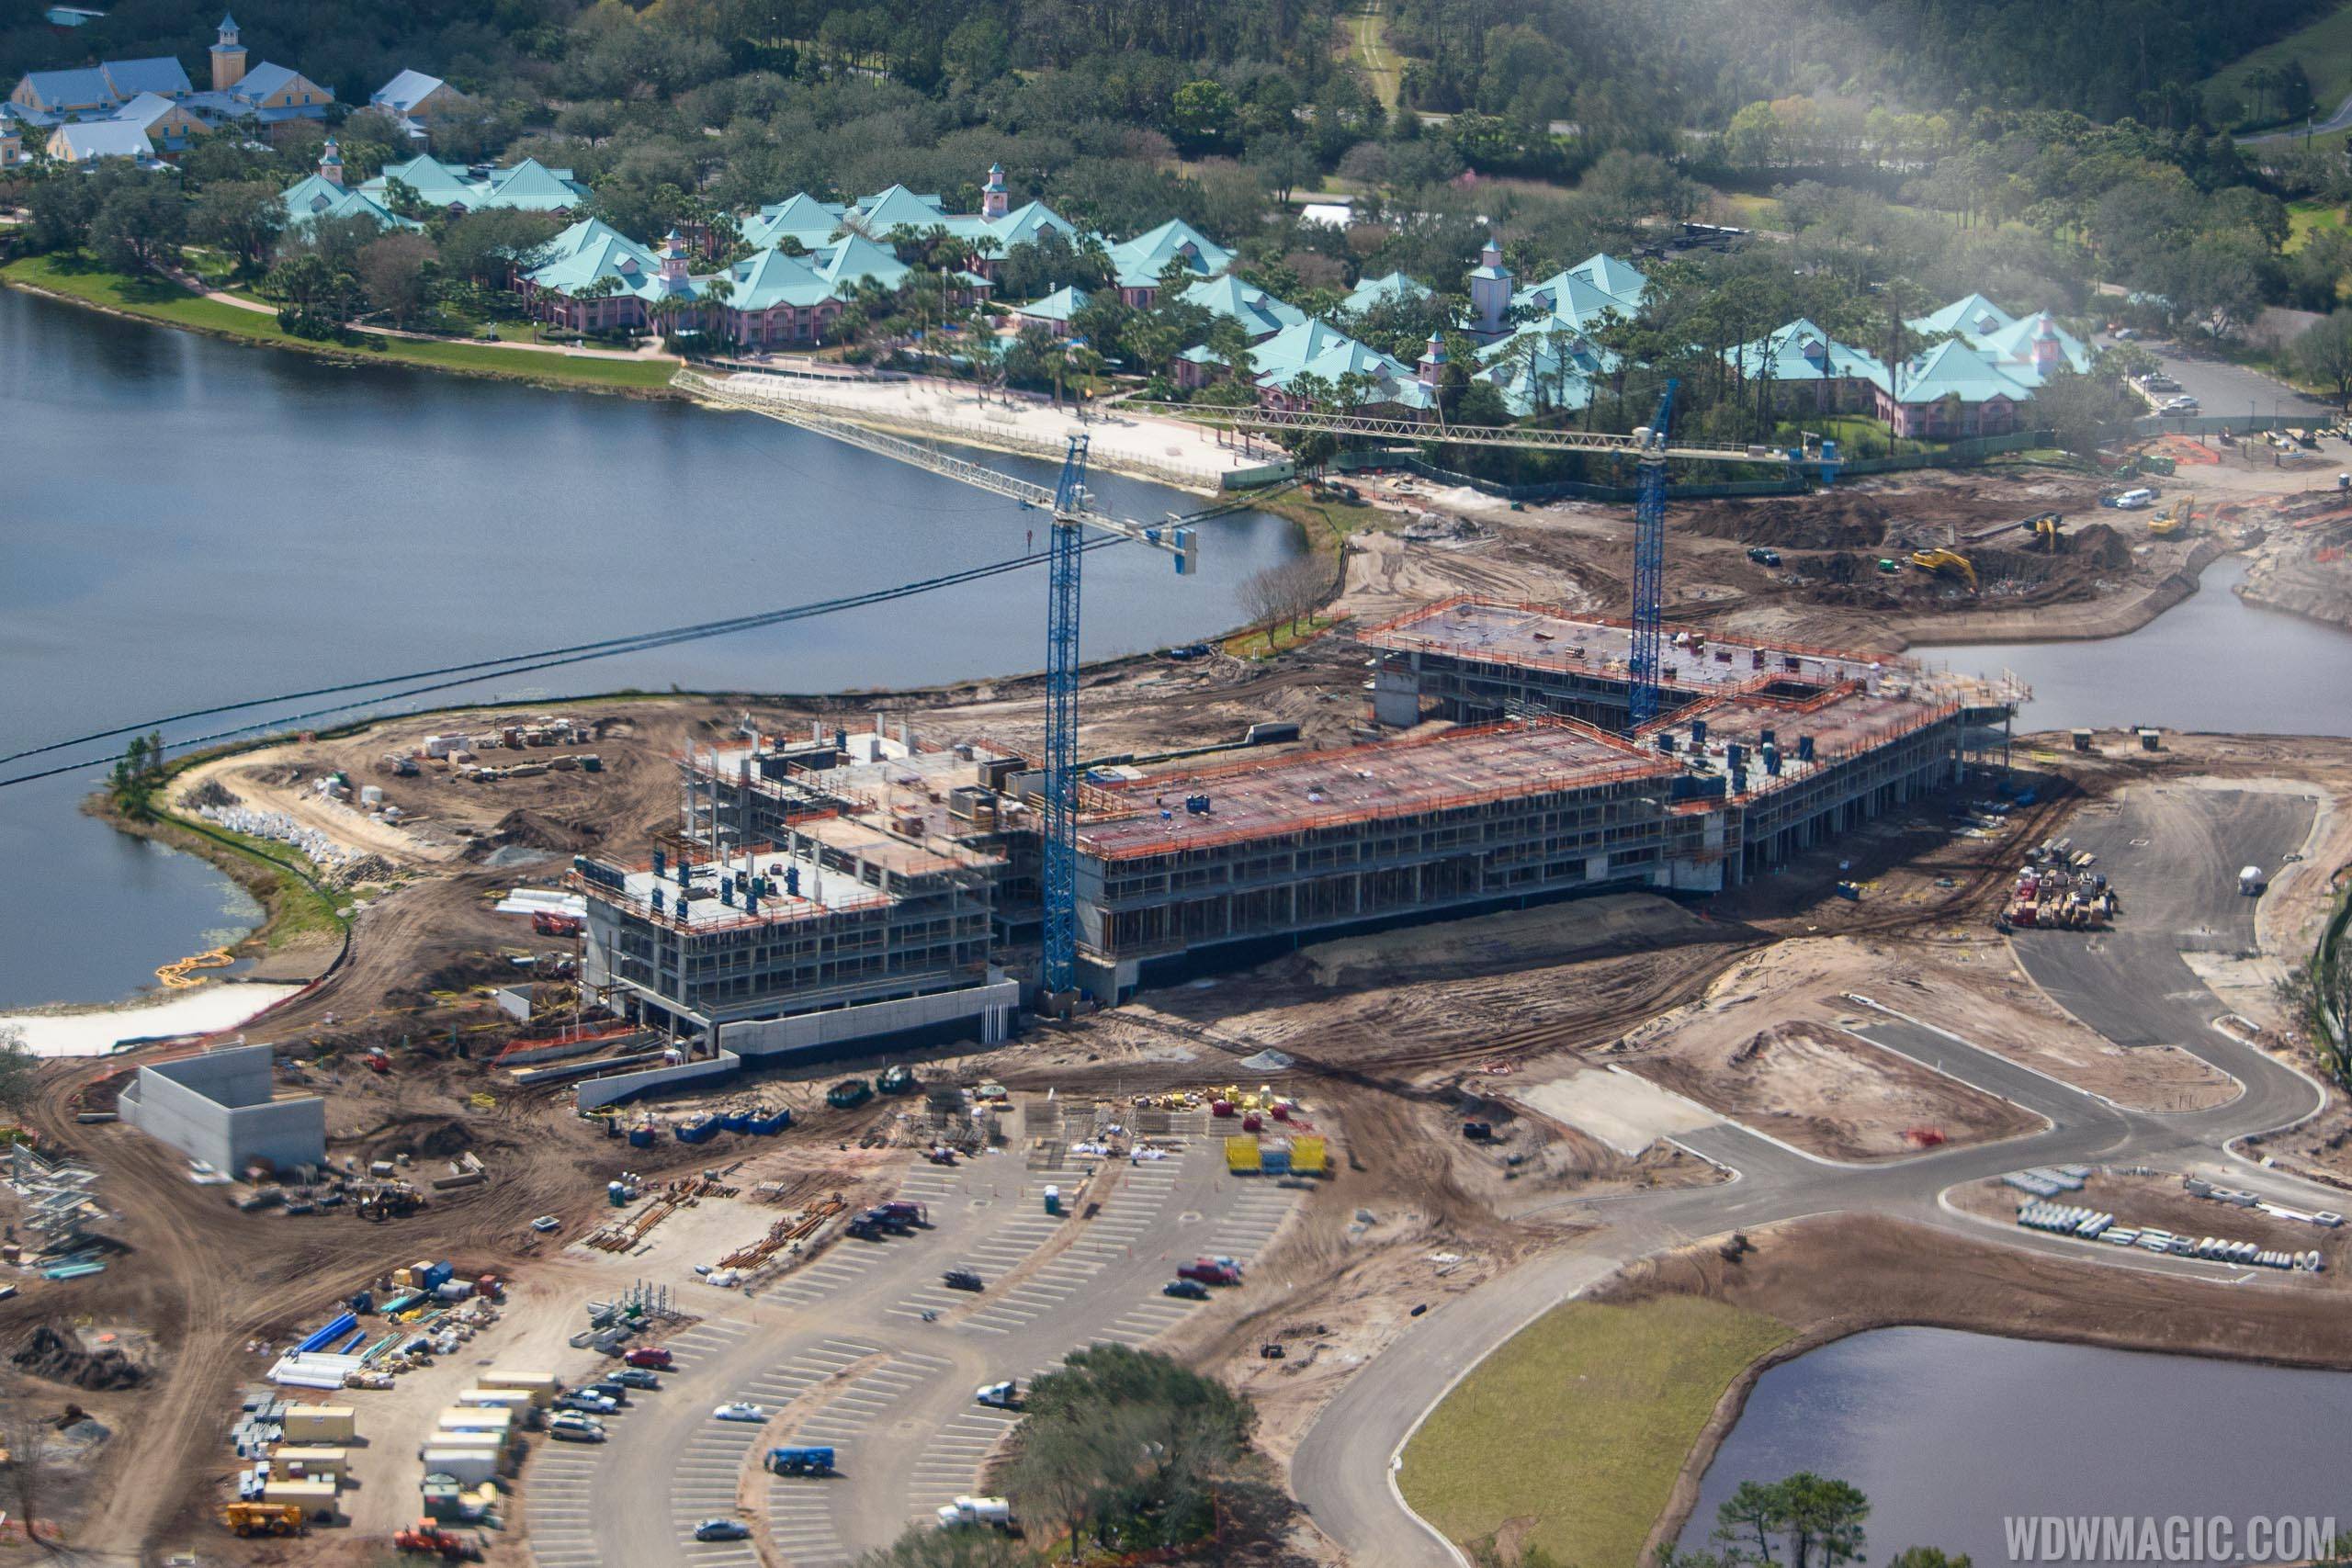 Disney Riviera construction from the air - February 2018